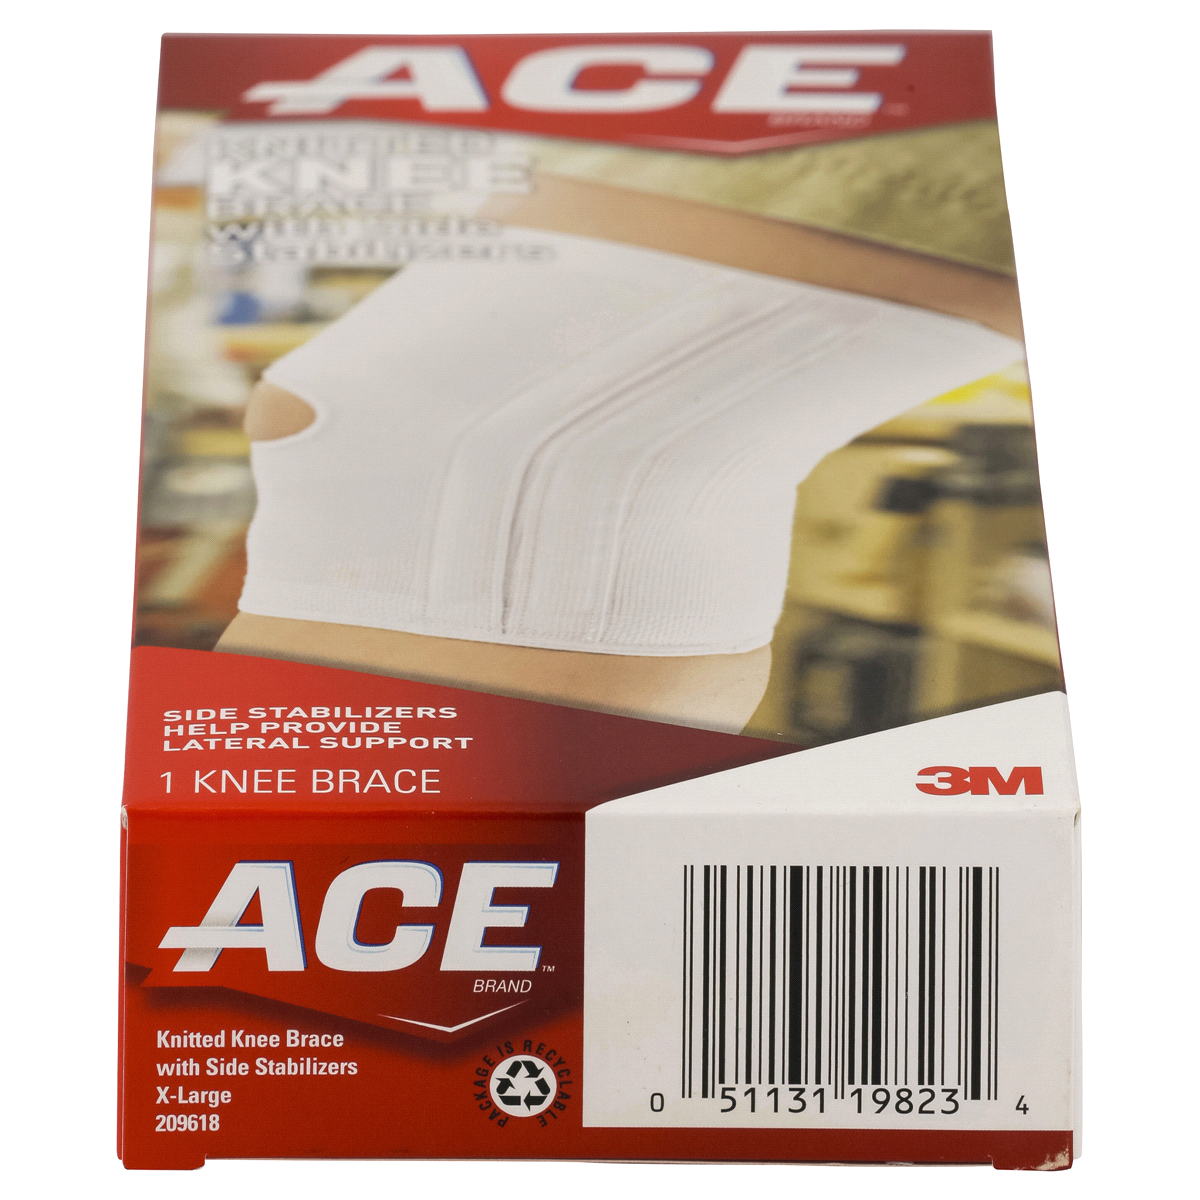 slide 4 of 5, Ace Knitted Knee Brace with Side Stabilizers Moderate Stabilizing, X-Large, XL